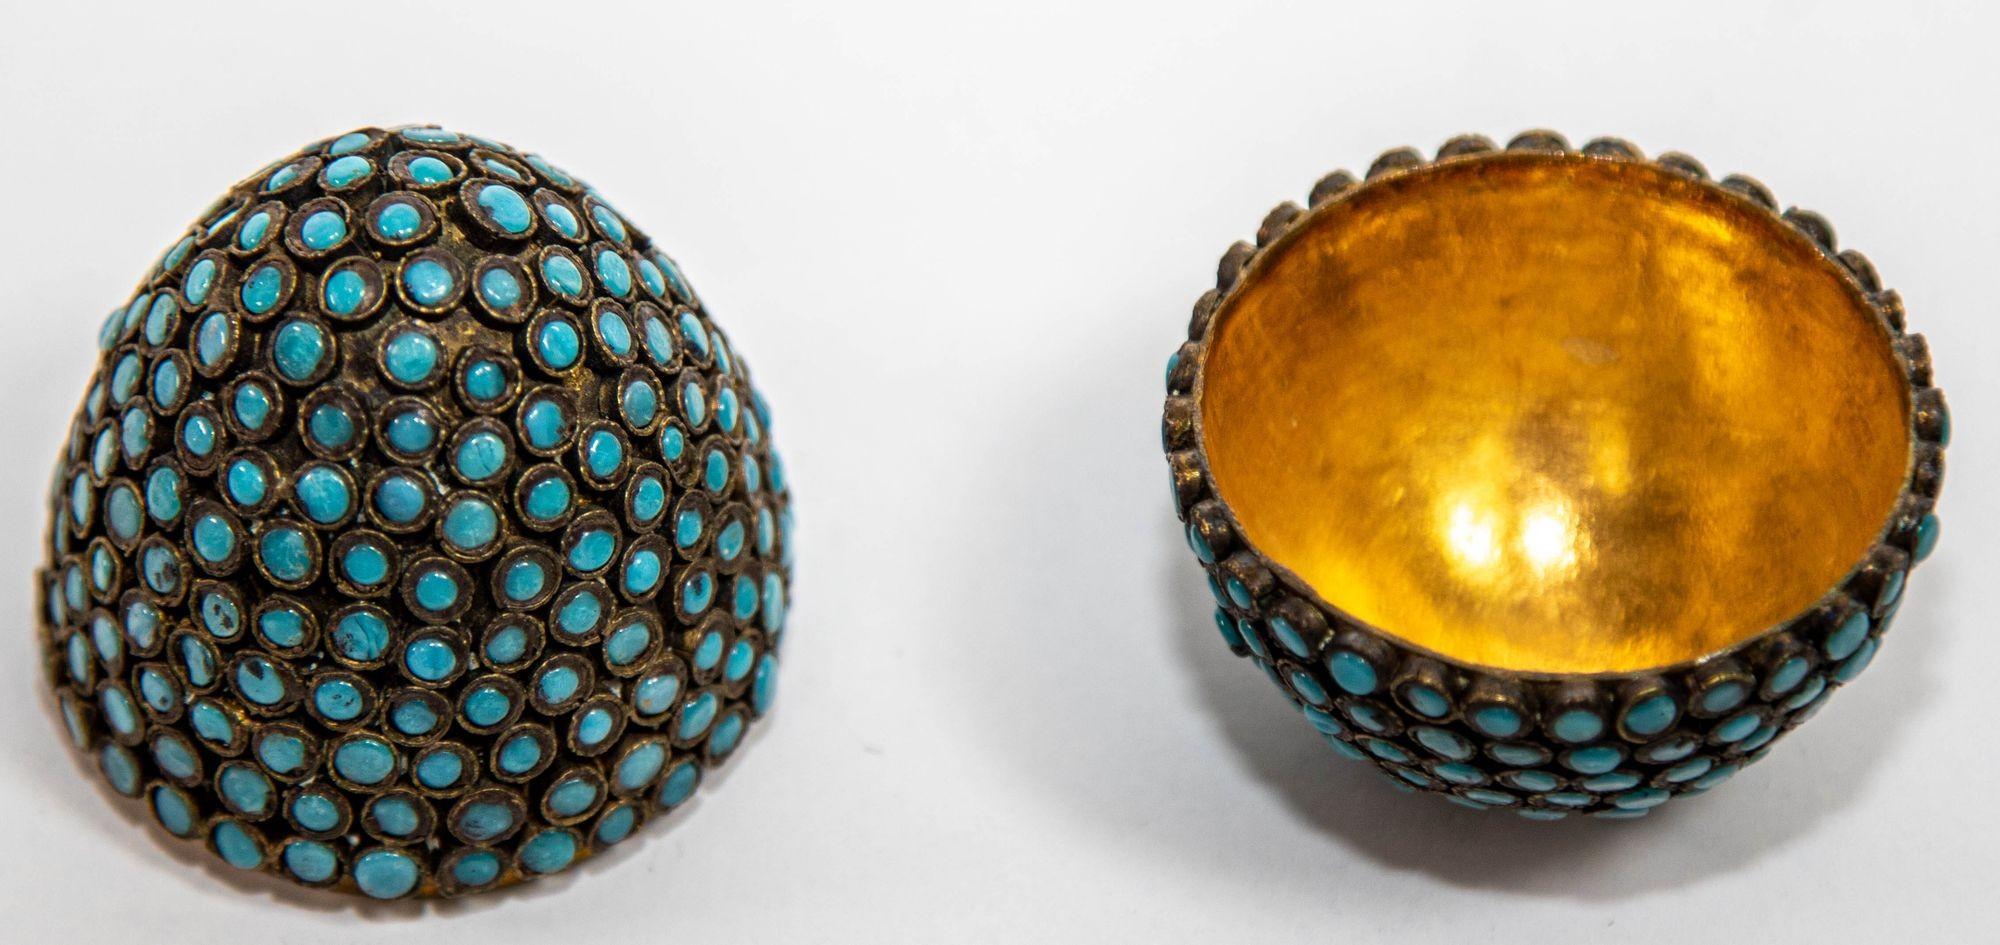 Hand-Crafted Antique Tibetan Egg Shaped Box with Turquoise Blue Stone Inlay For Sale